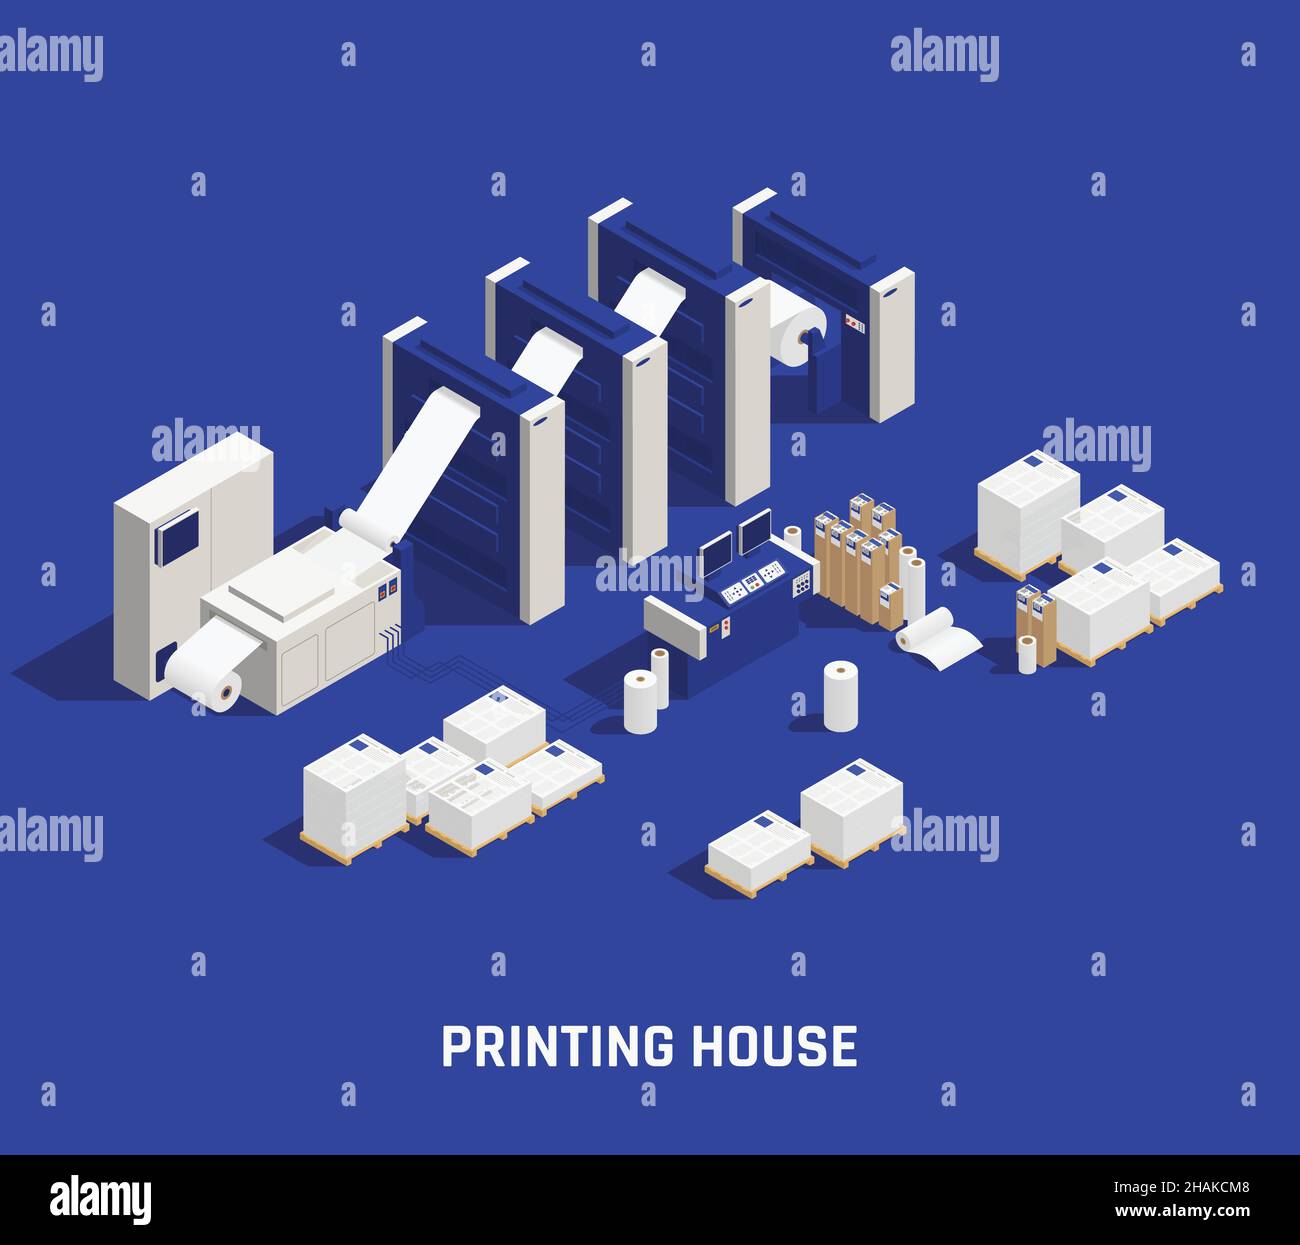 Printing house isometric composition with text and images of printers with paper rolls stacks and computers vector illustration Stock Vector